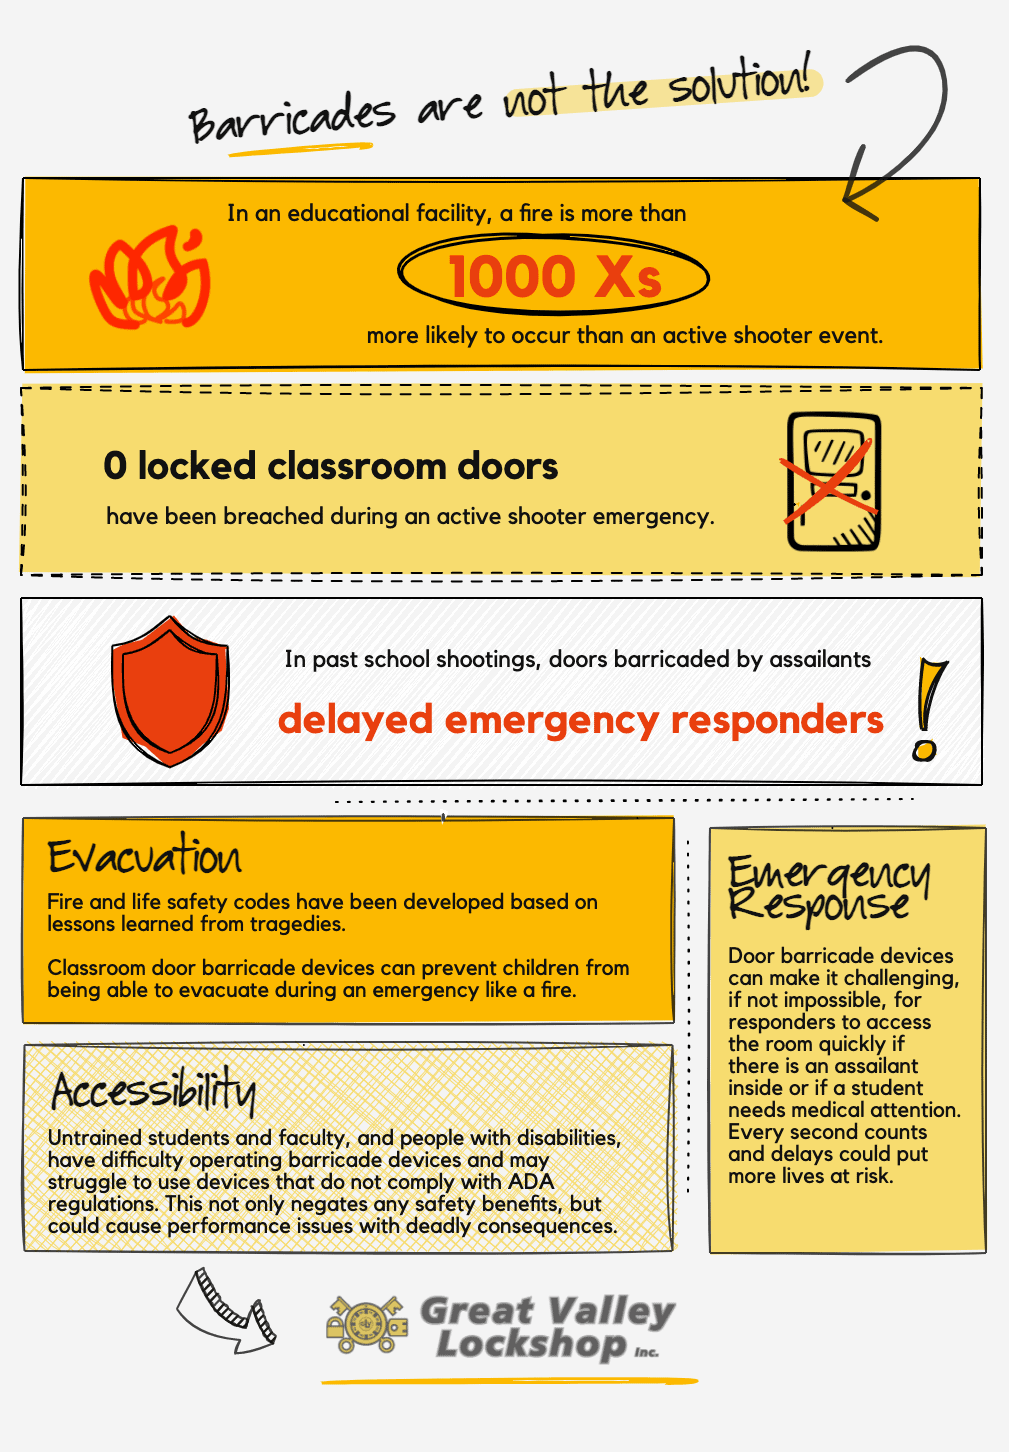 infographic about school security and barricade devices